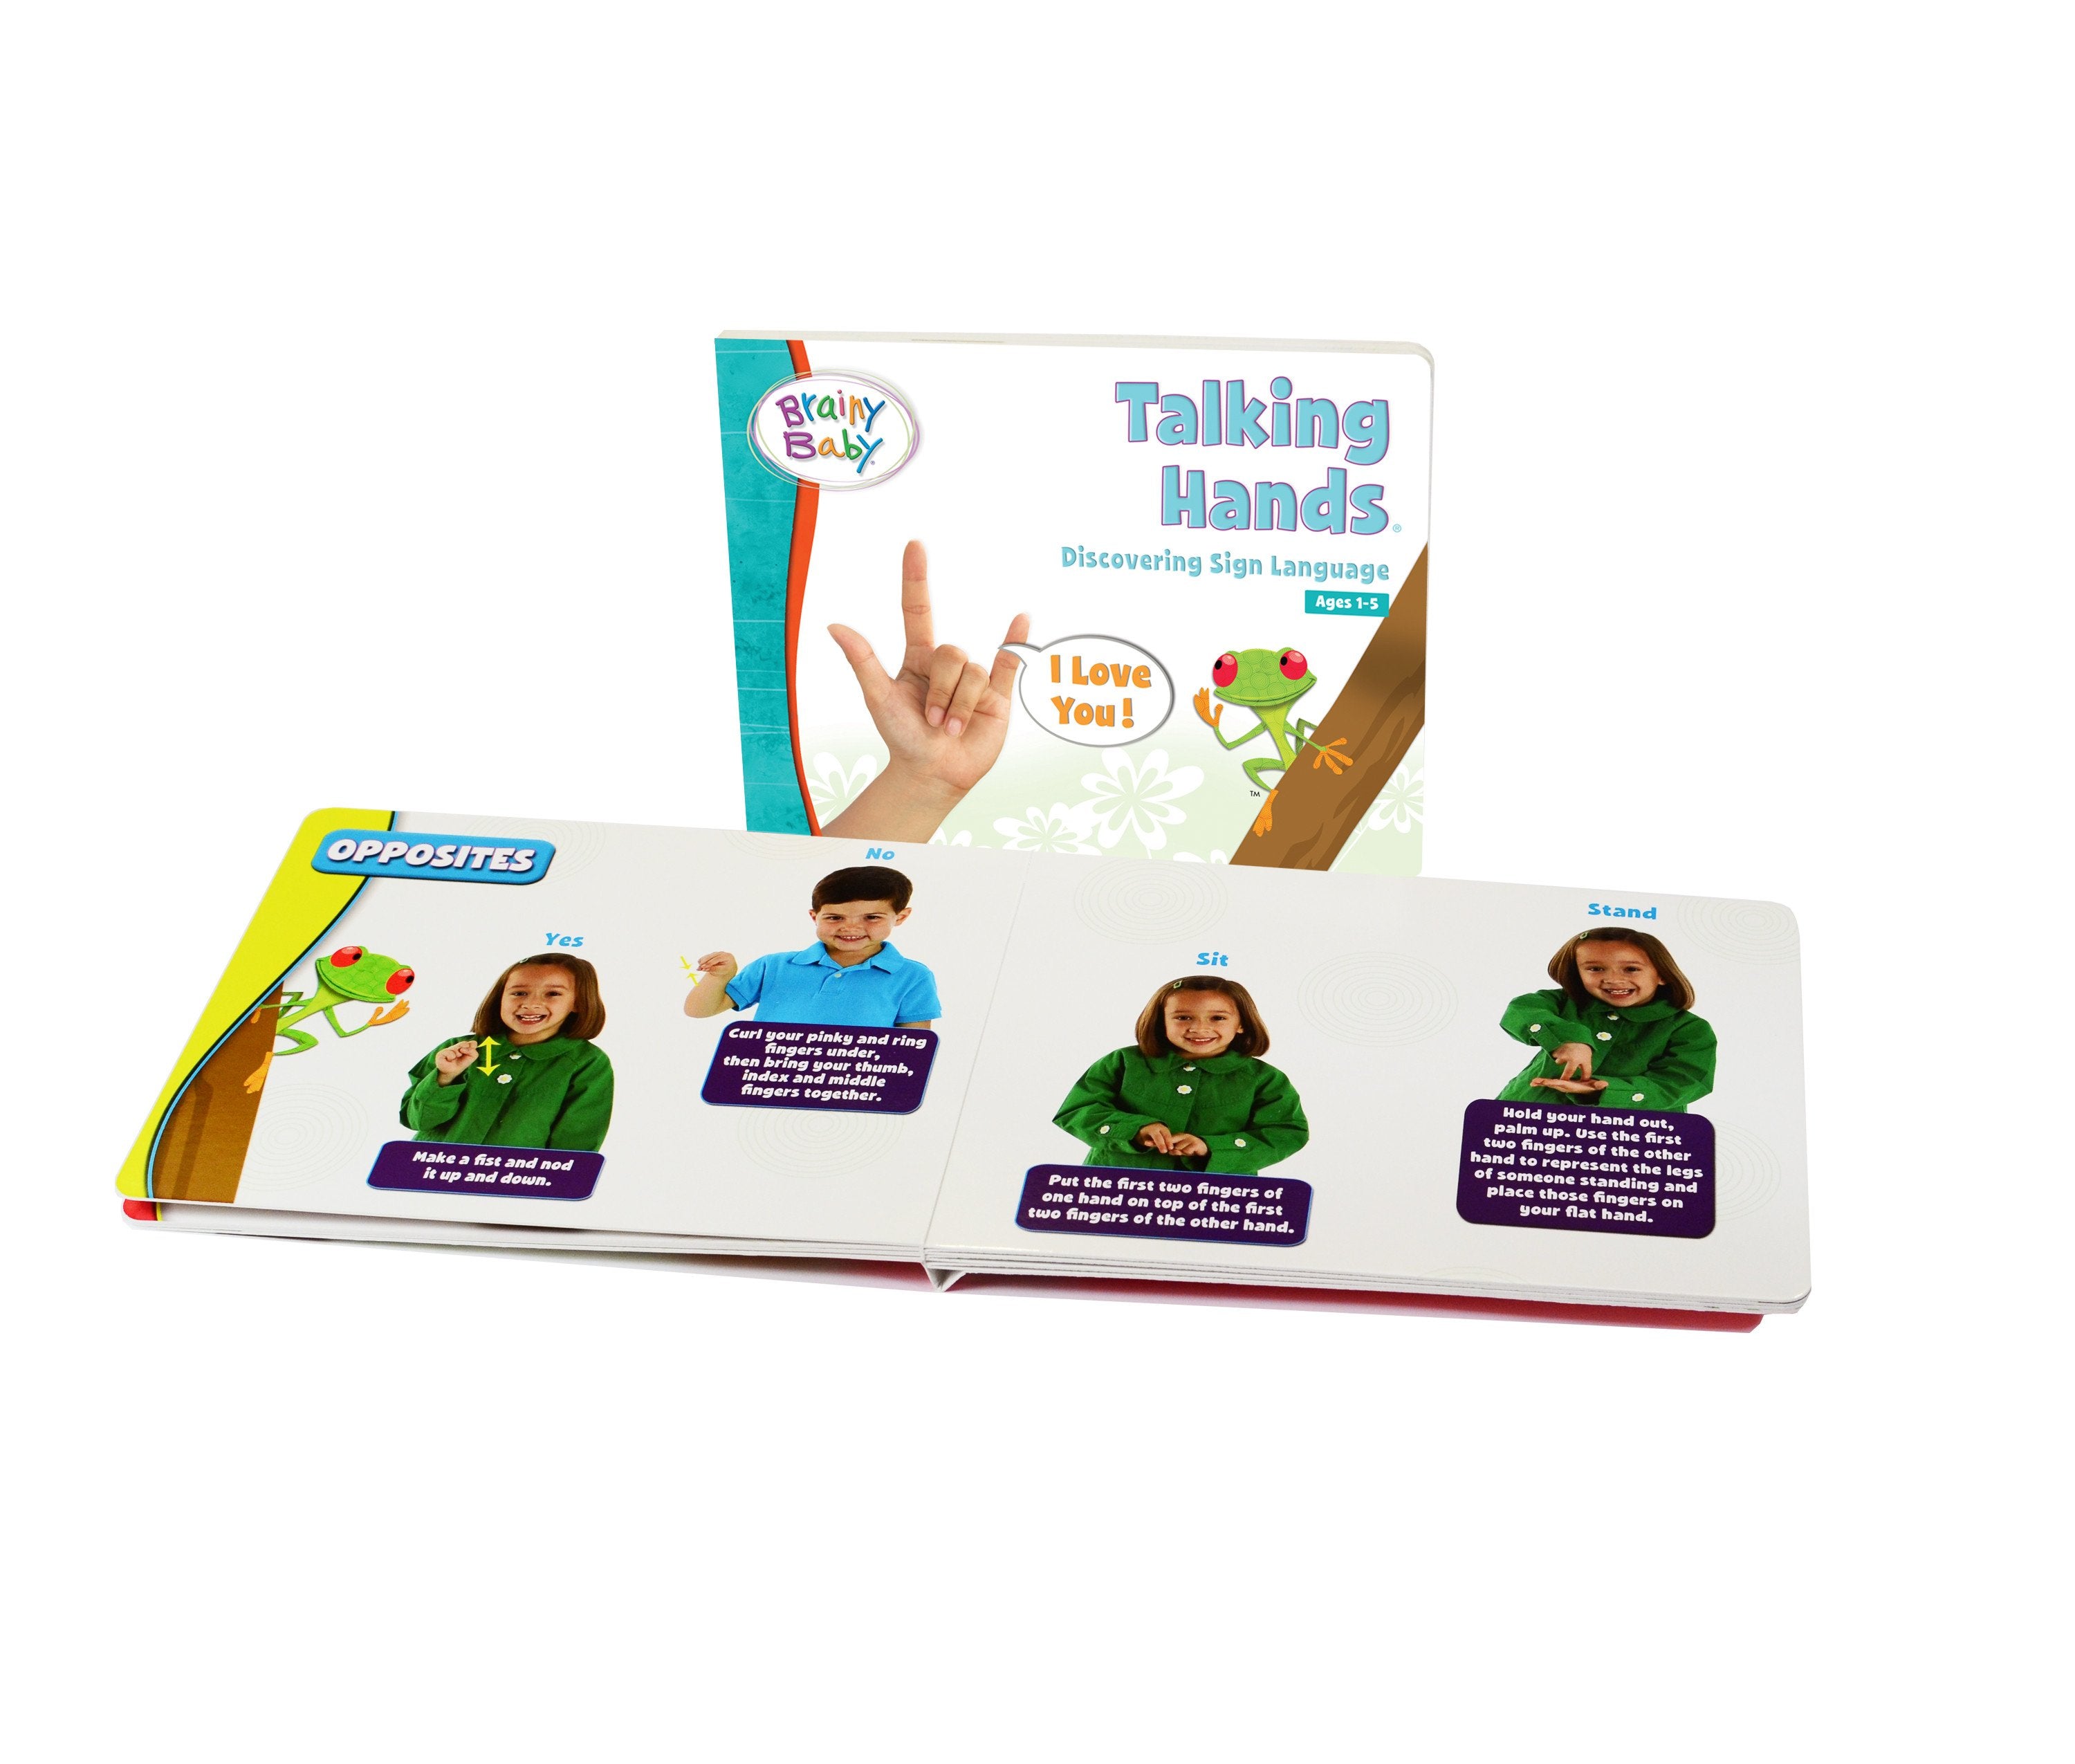 Brainy Baby Talking Hands Discovering Sign Language Board Book